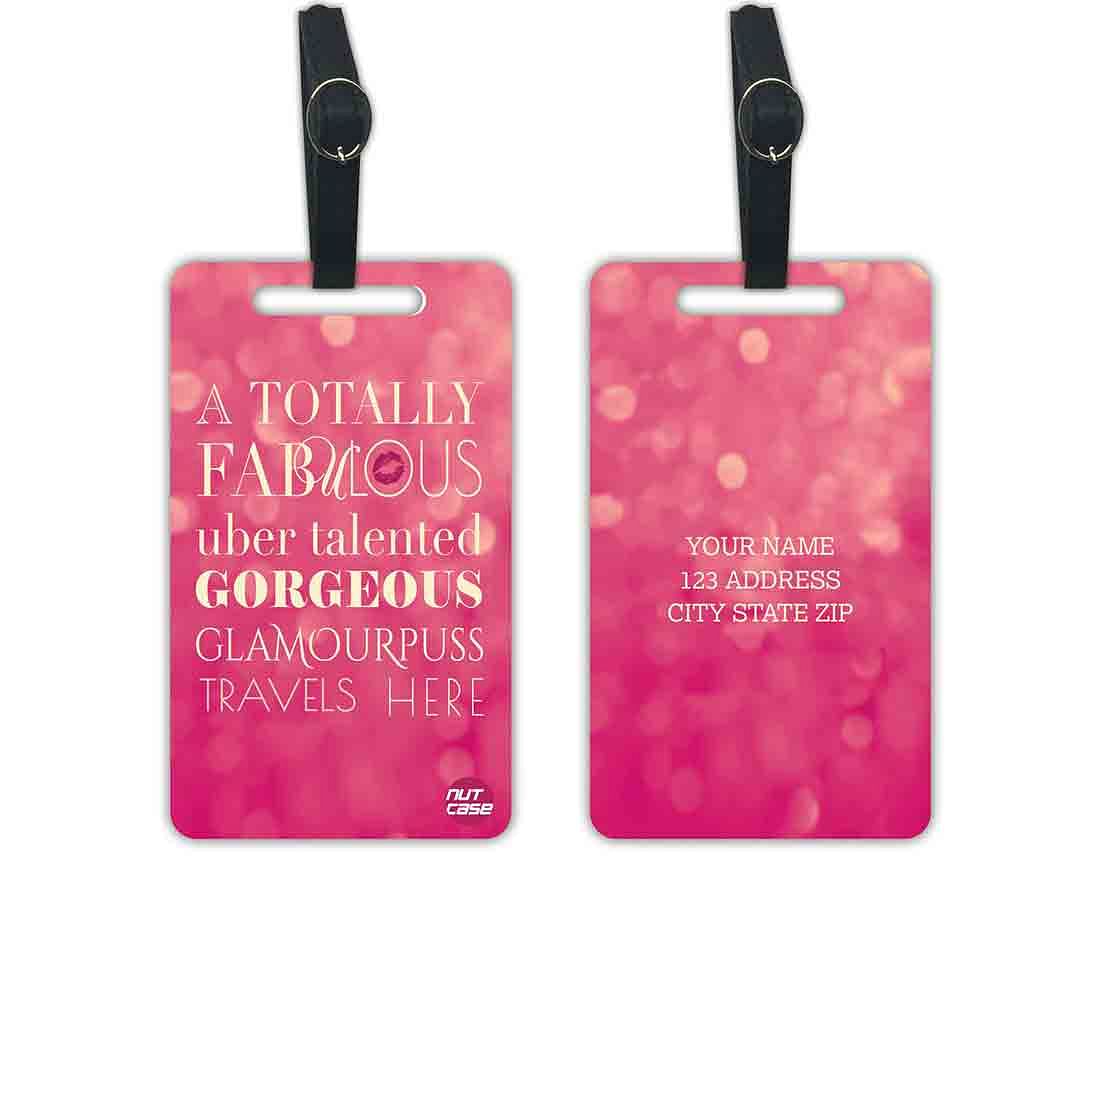 Personalized Luggage Bag Tags for Women - Set of 2 Nutcase